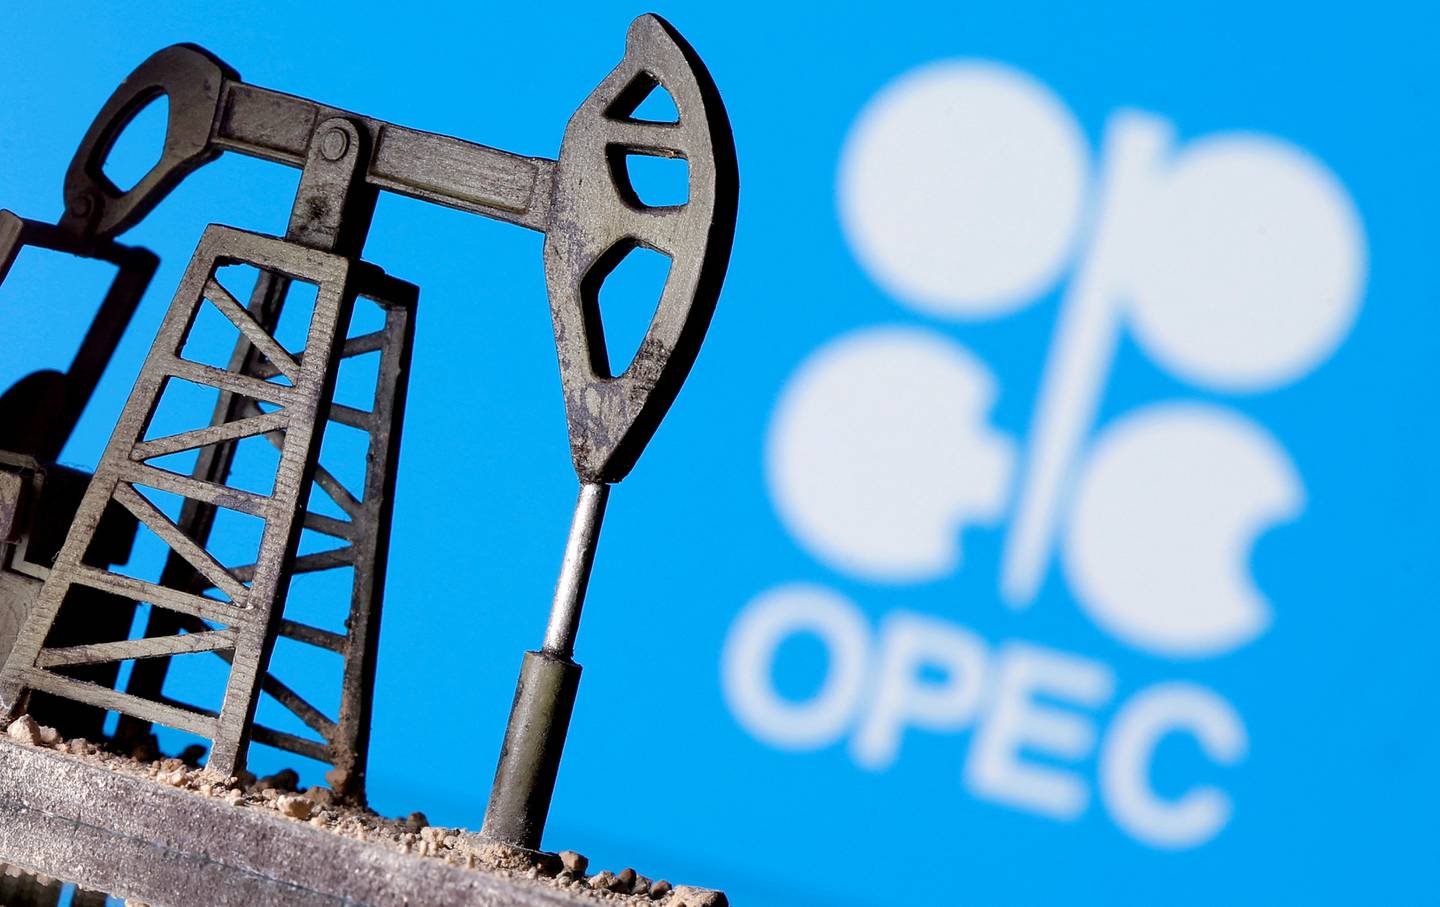 The Opec+ meeting next week will serve as a major catalyst for the oil market, analysts say. Reuters